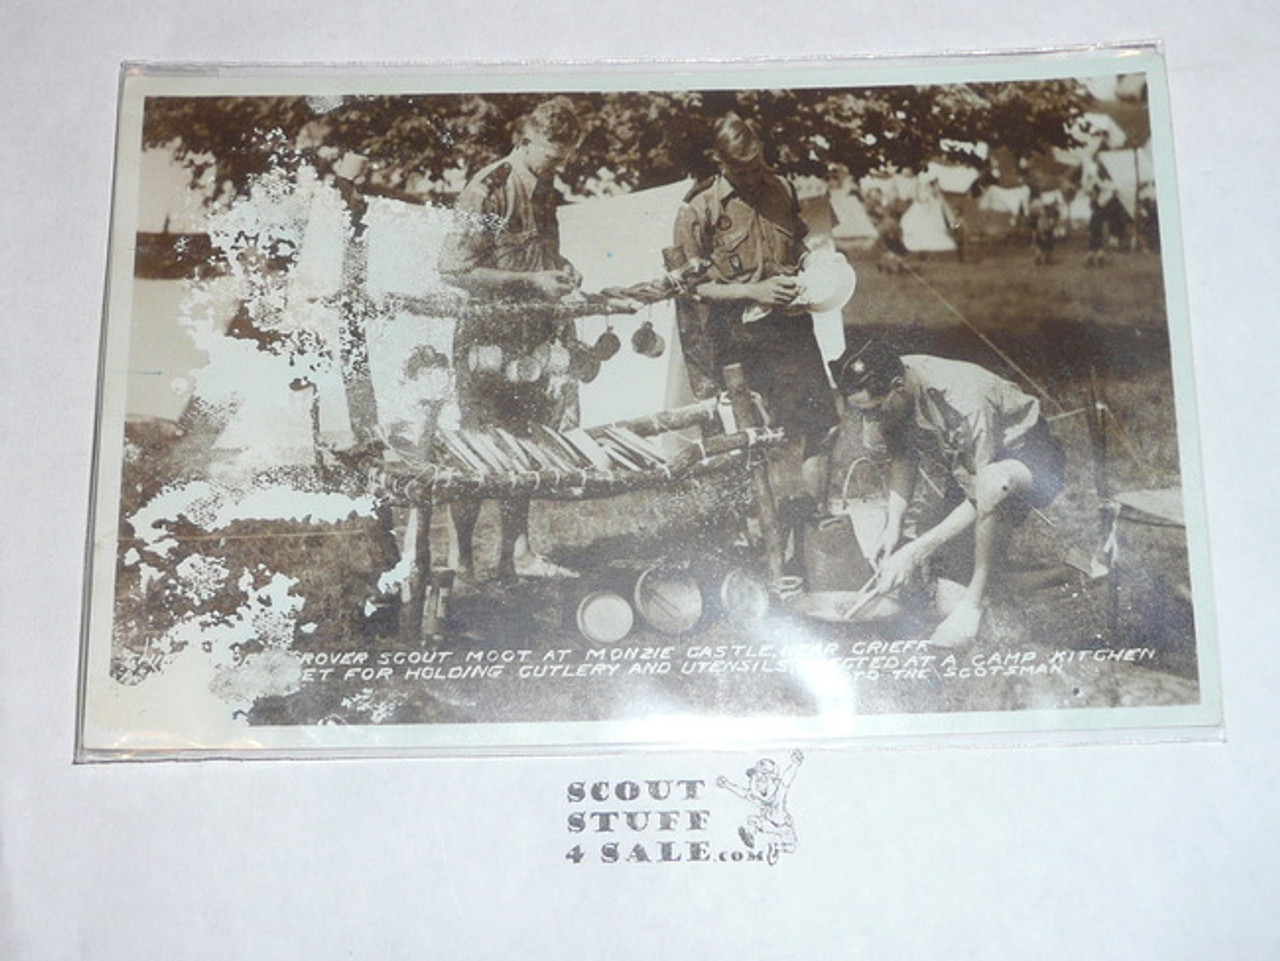 Very Early Rover Moot at Monzie Castle Photo Post card #1